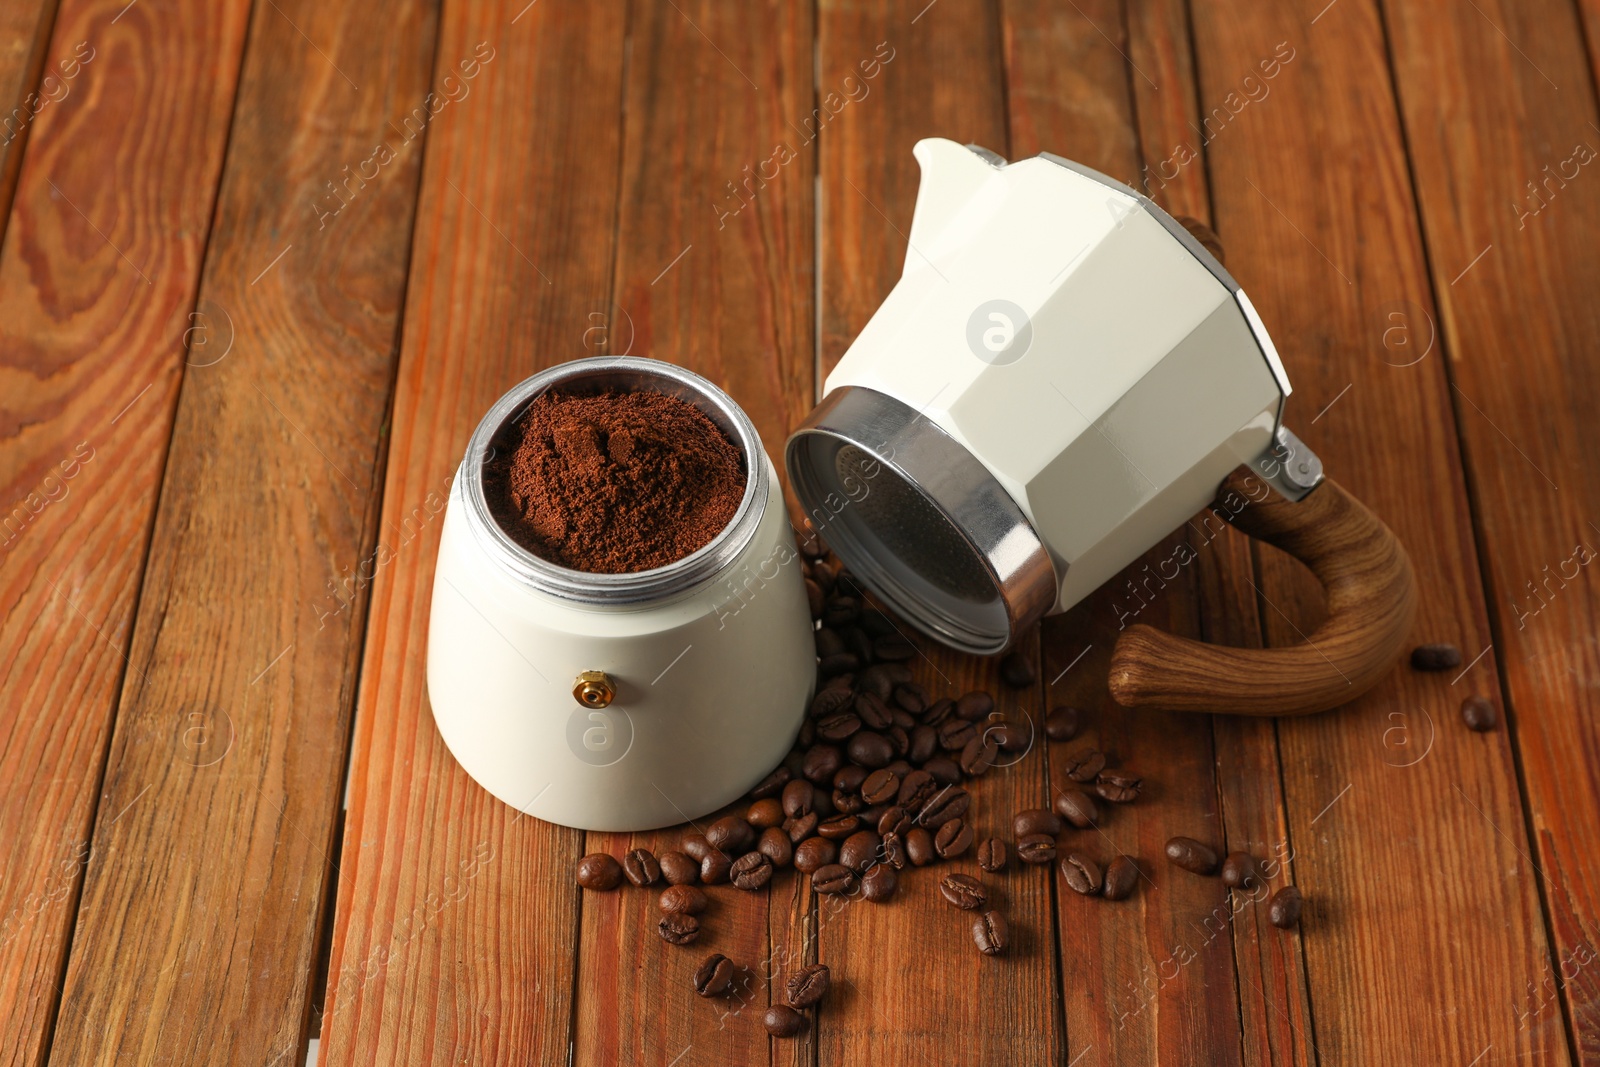 Photo of Moka pot with ground coffee and beans on wooden table